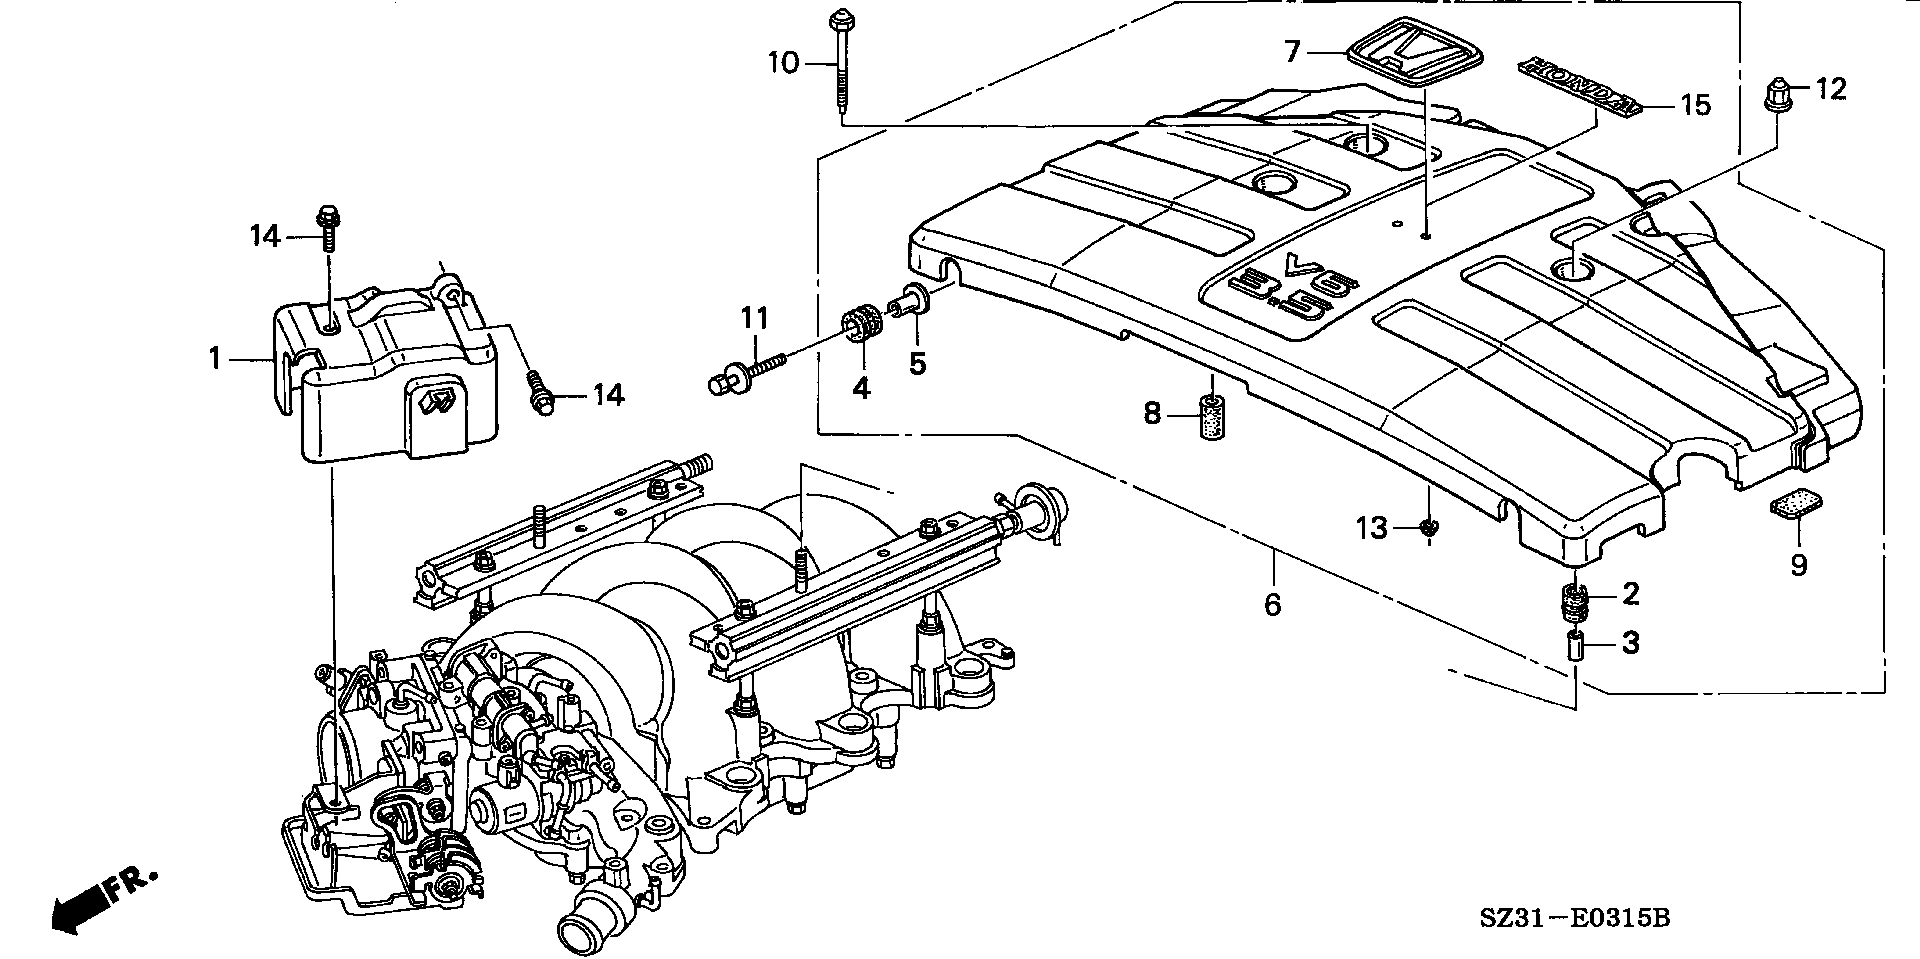 ENGINE HARNESS COVER